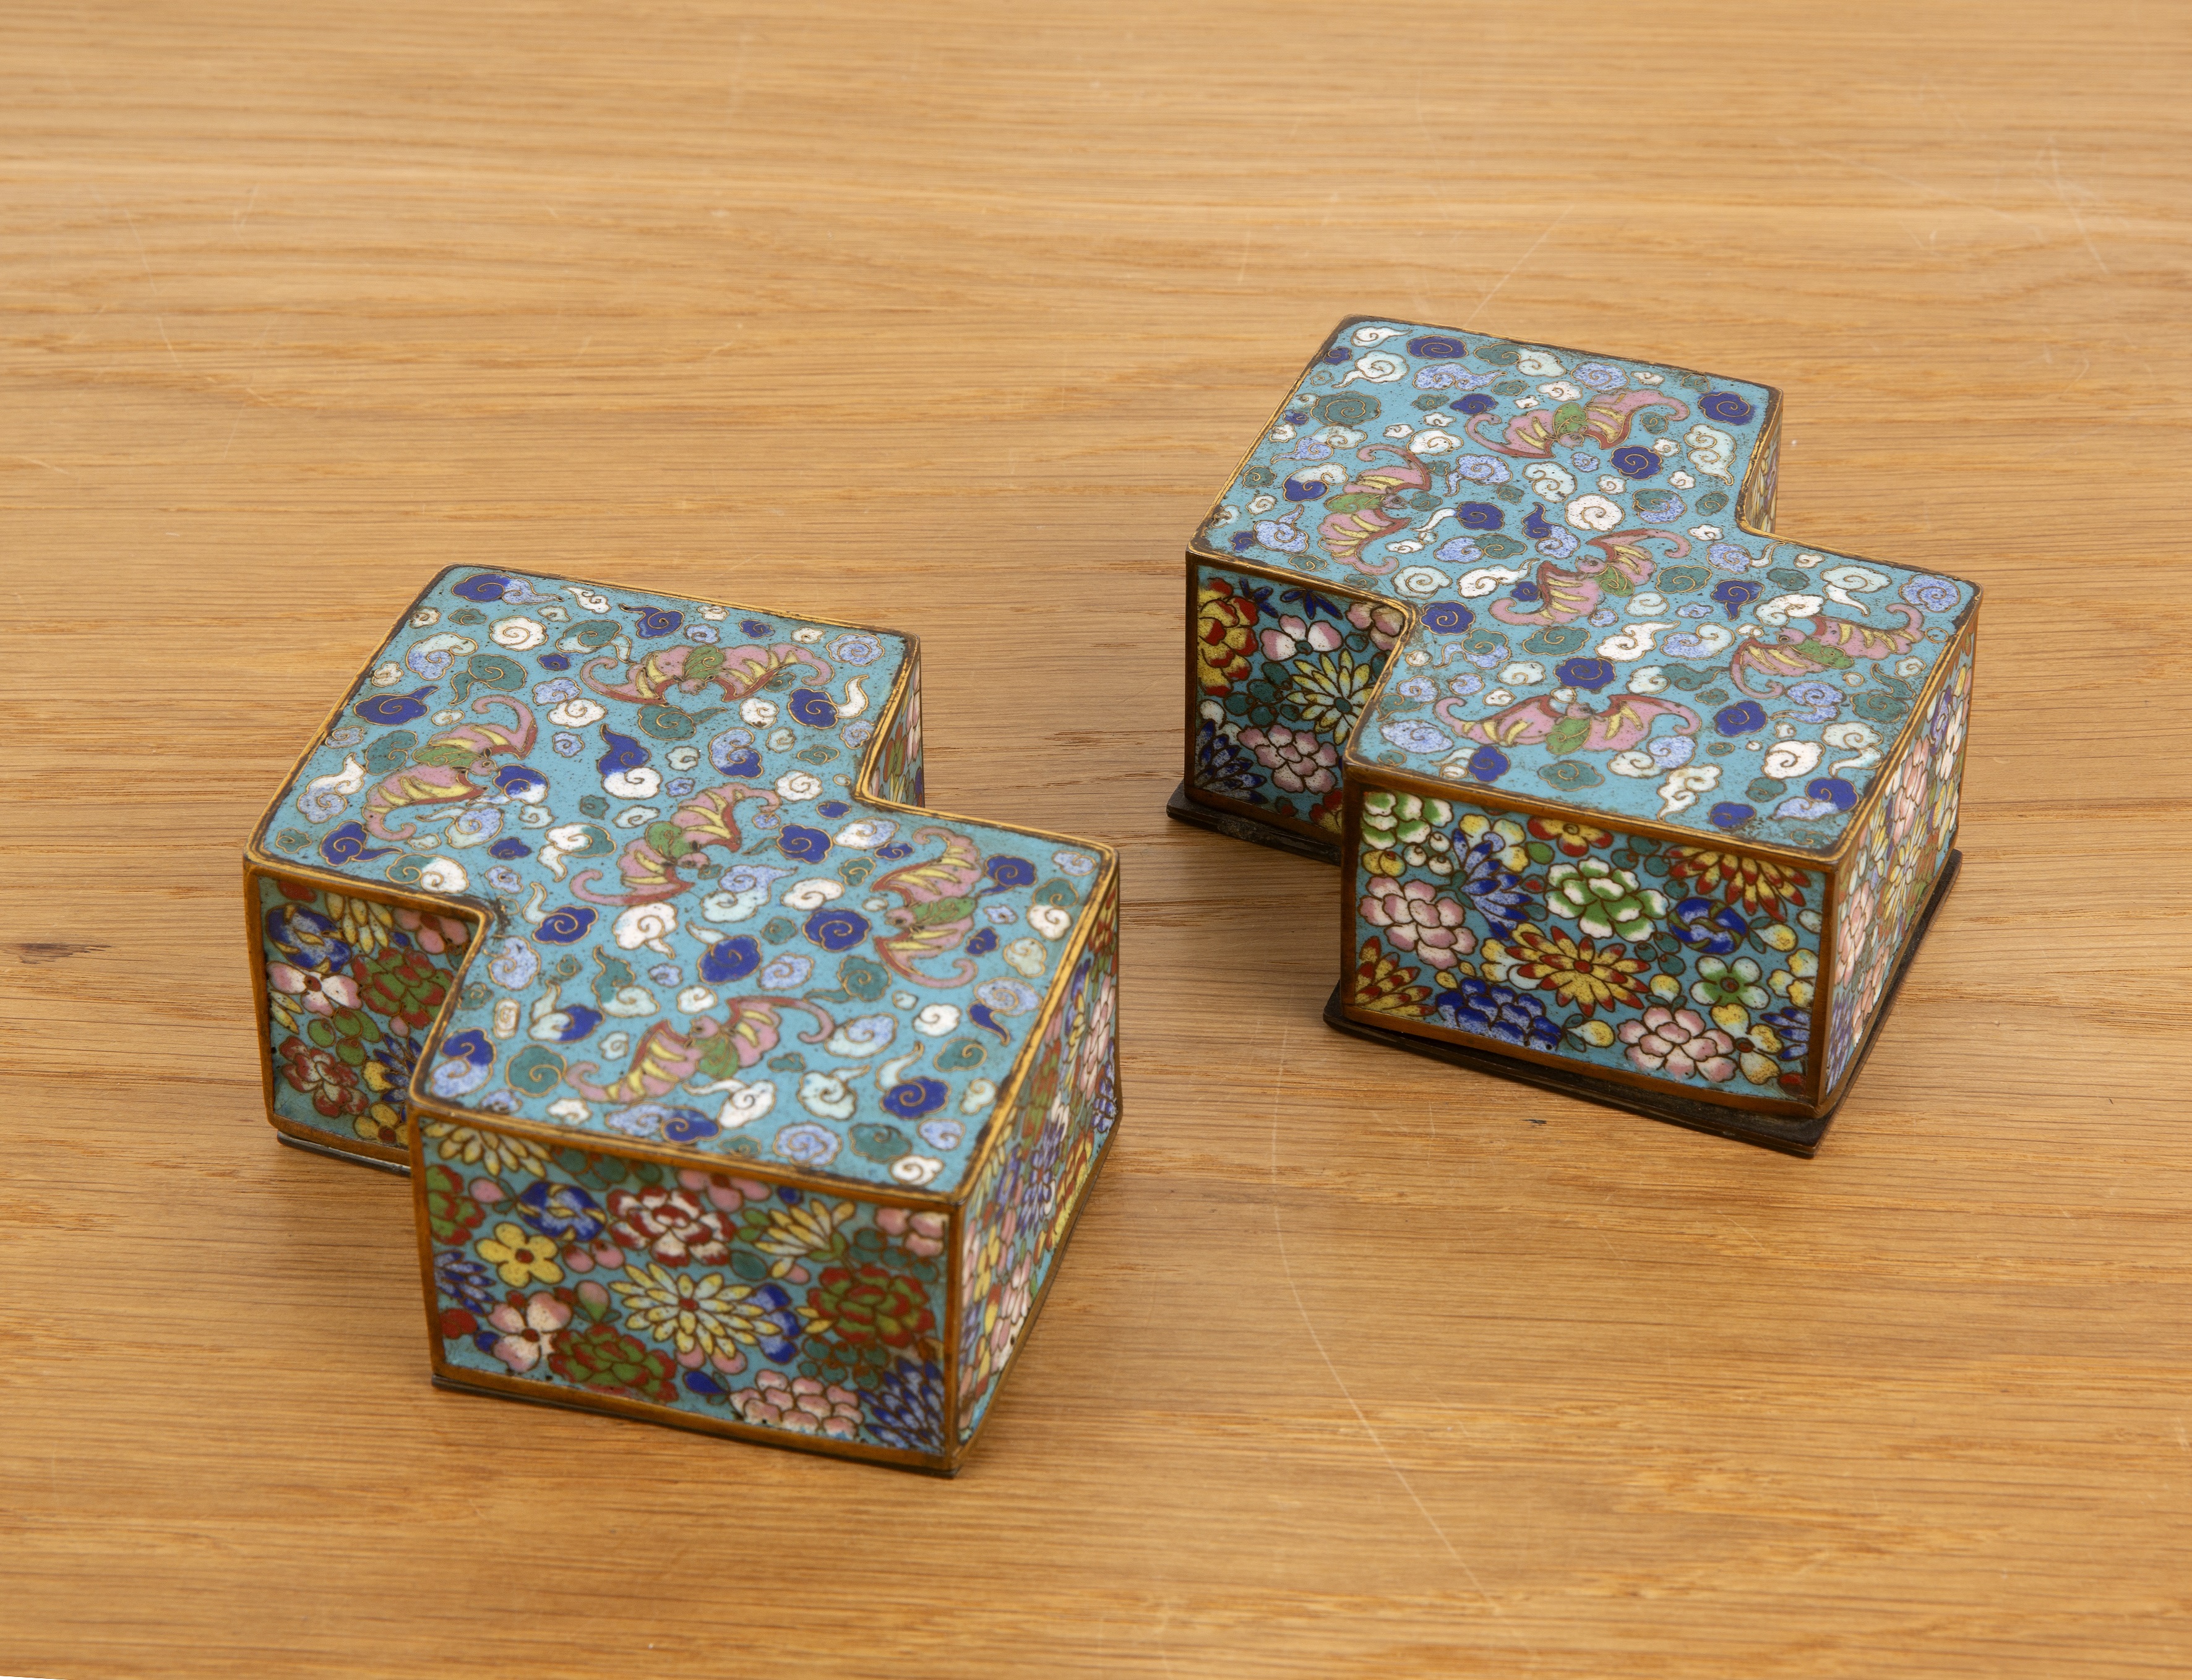 Pair of shaped blue ground cloisonne boxes Chinese, 19th Century each with bat and butterfly